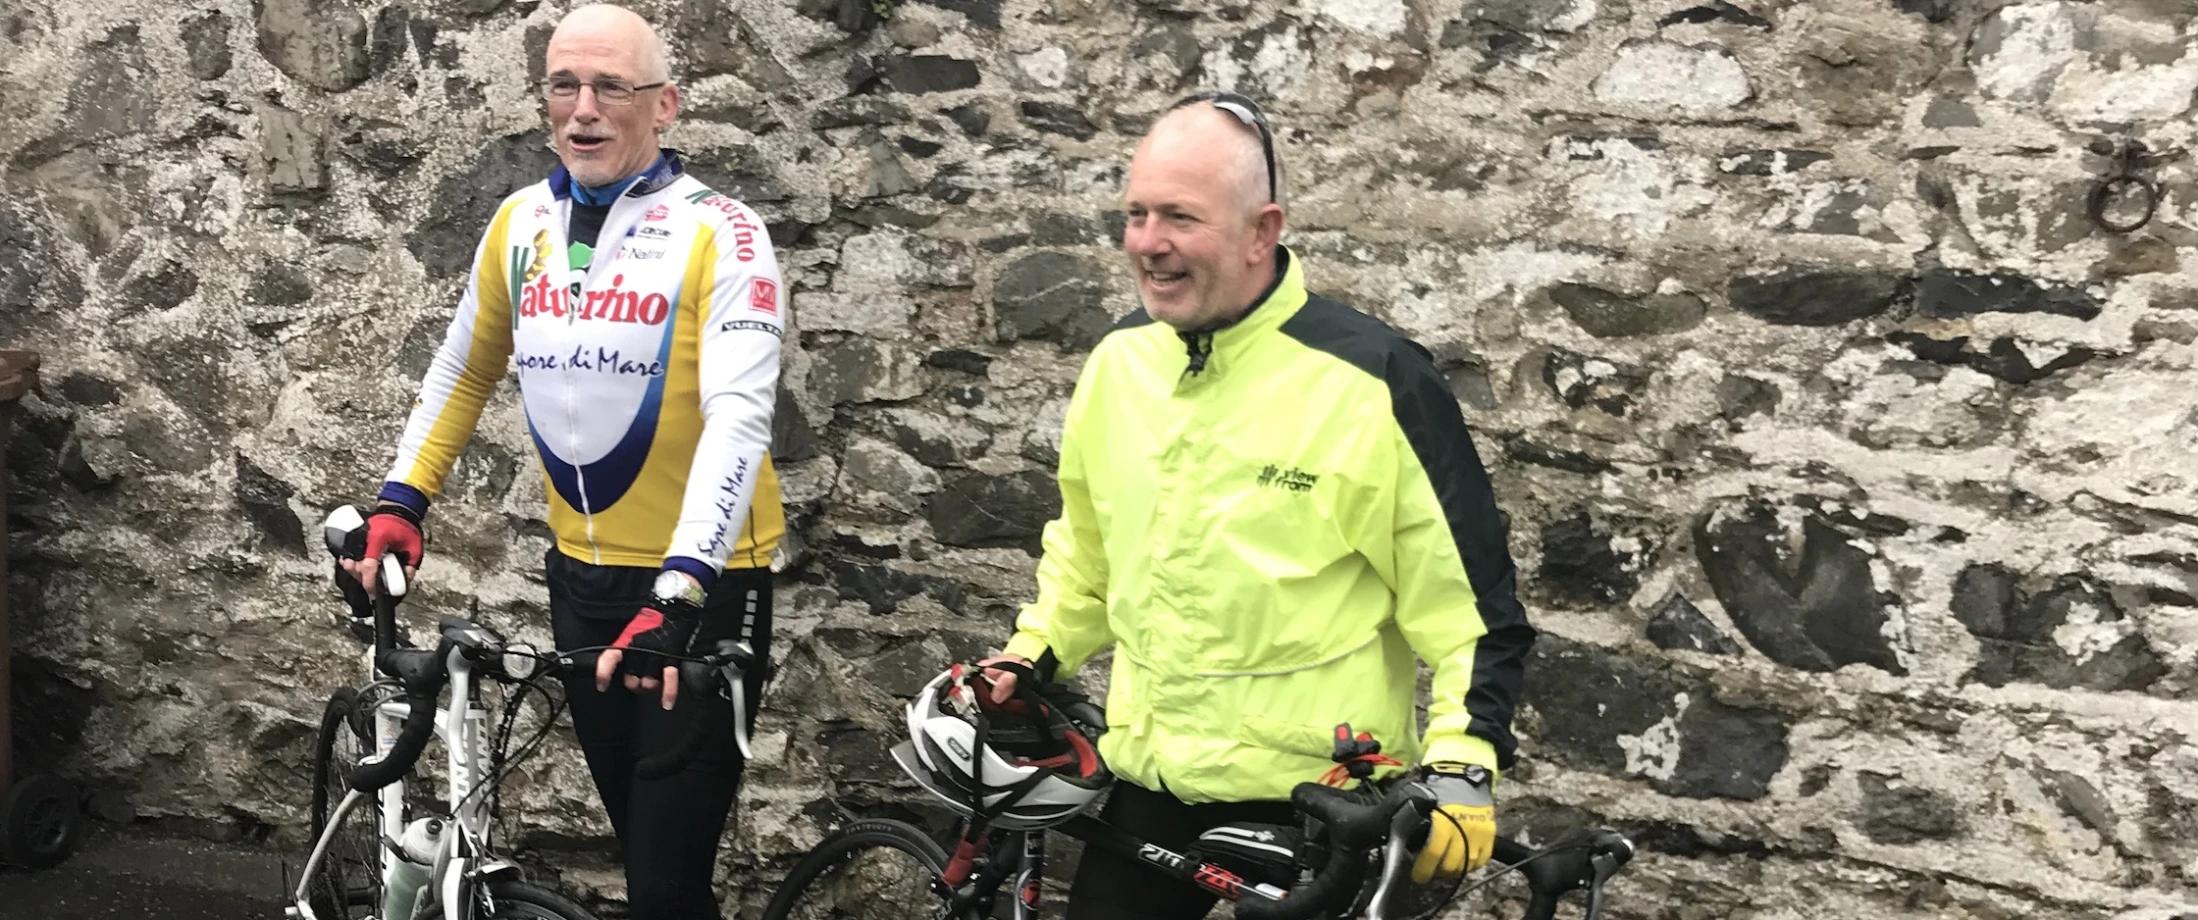 Dean Geoff cycles for Hospice Services